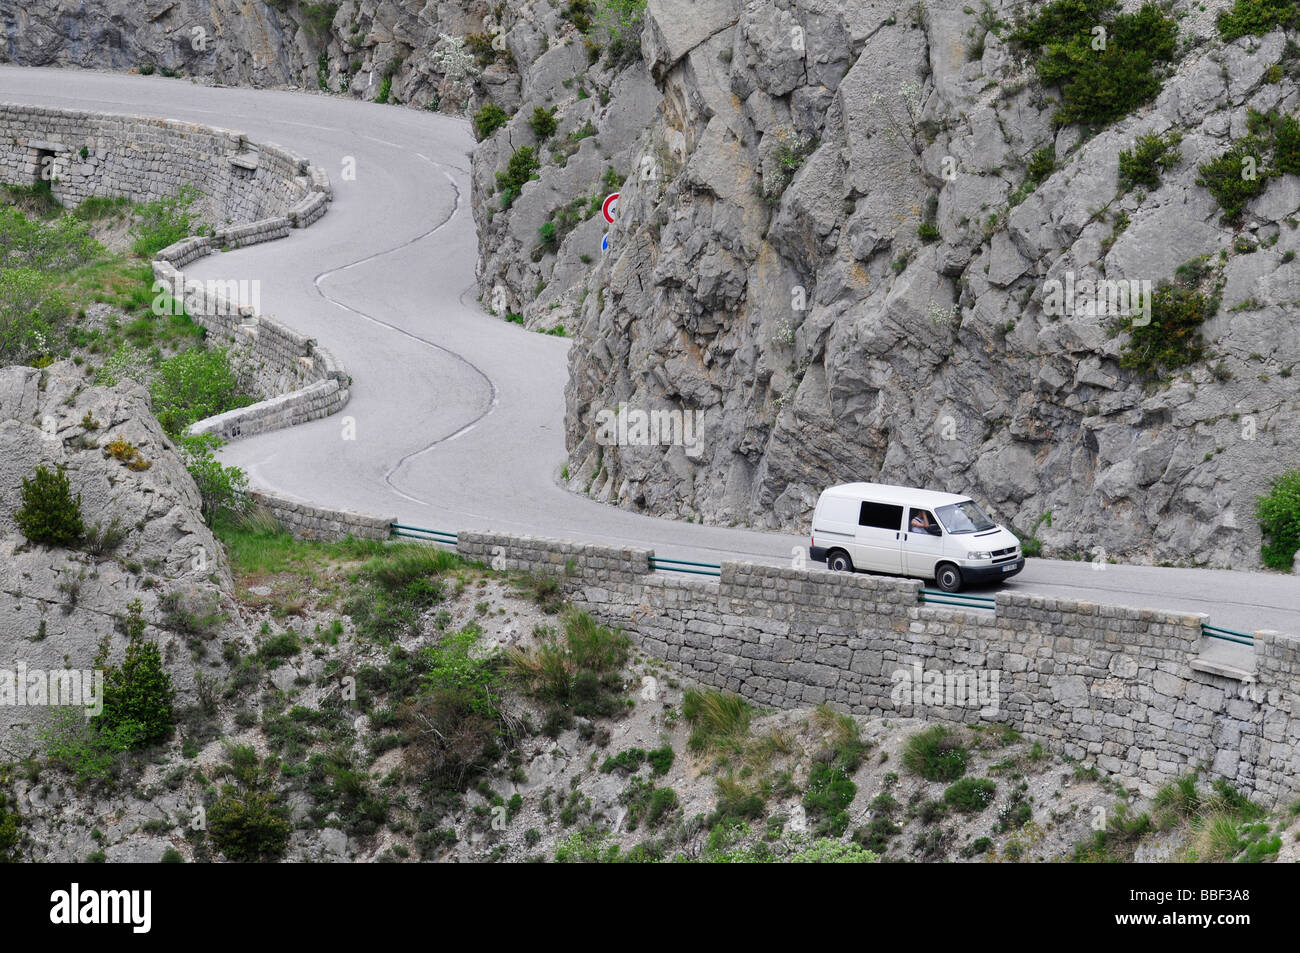 Driving a car on the famous 'route Napoleon', a winding scenic road in a canyon in southern France. Stock Photo